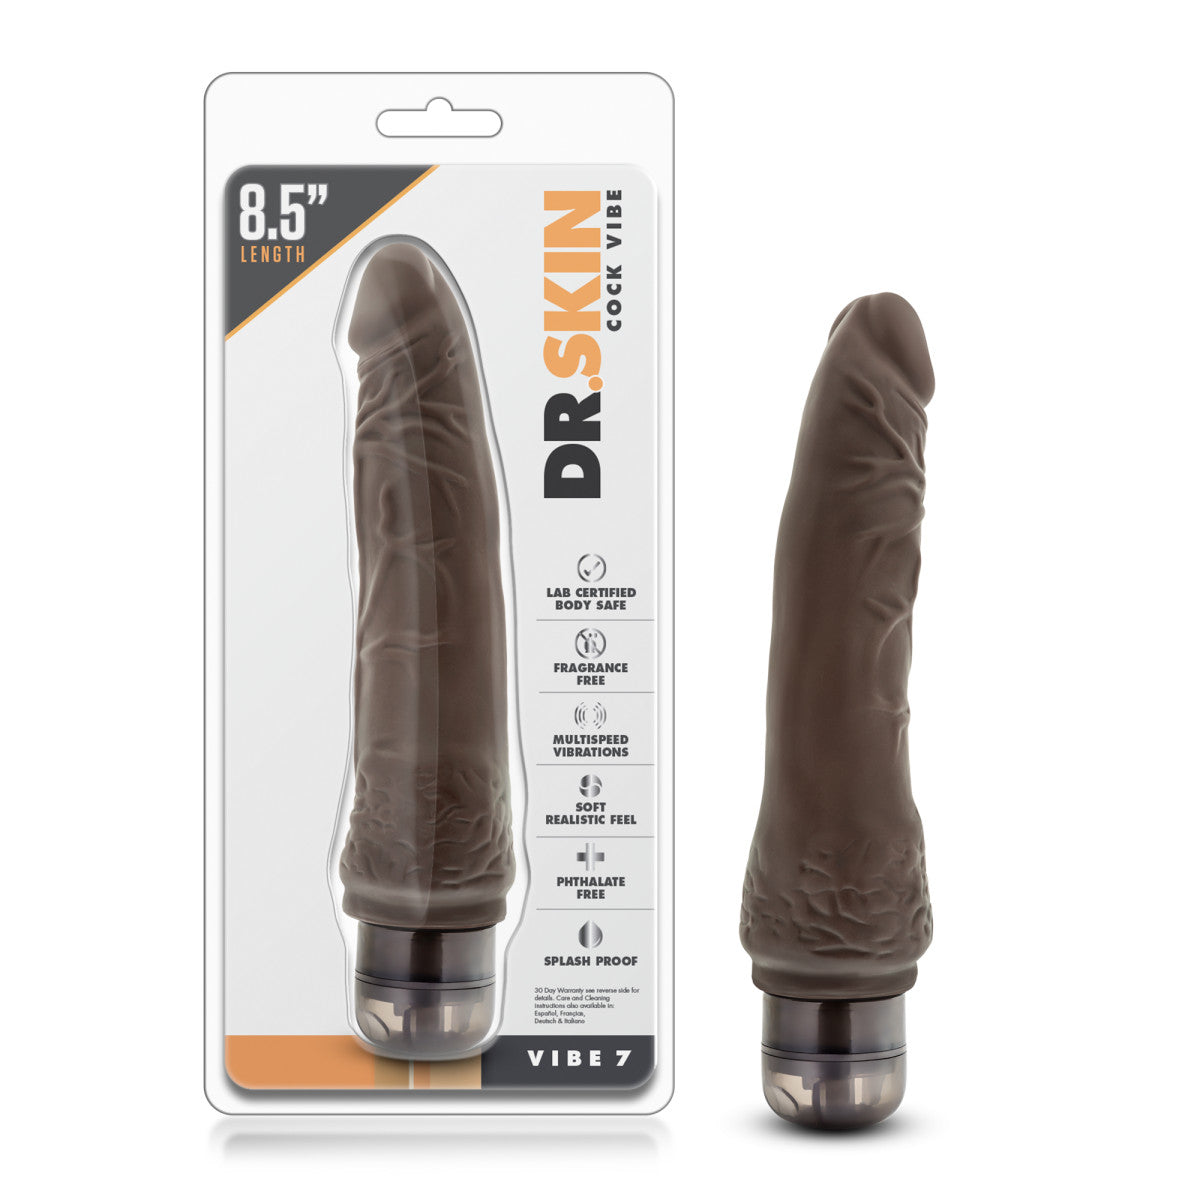 Dr. Skin - Cock Vibe 7 - 8.5 Inch Vibrating Cock - Chocolate